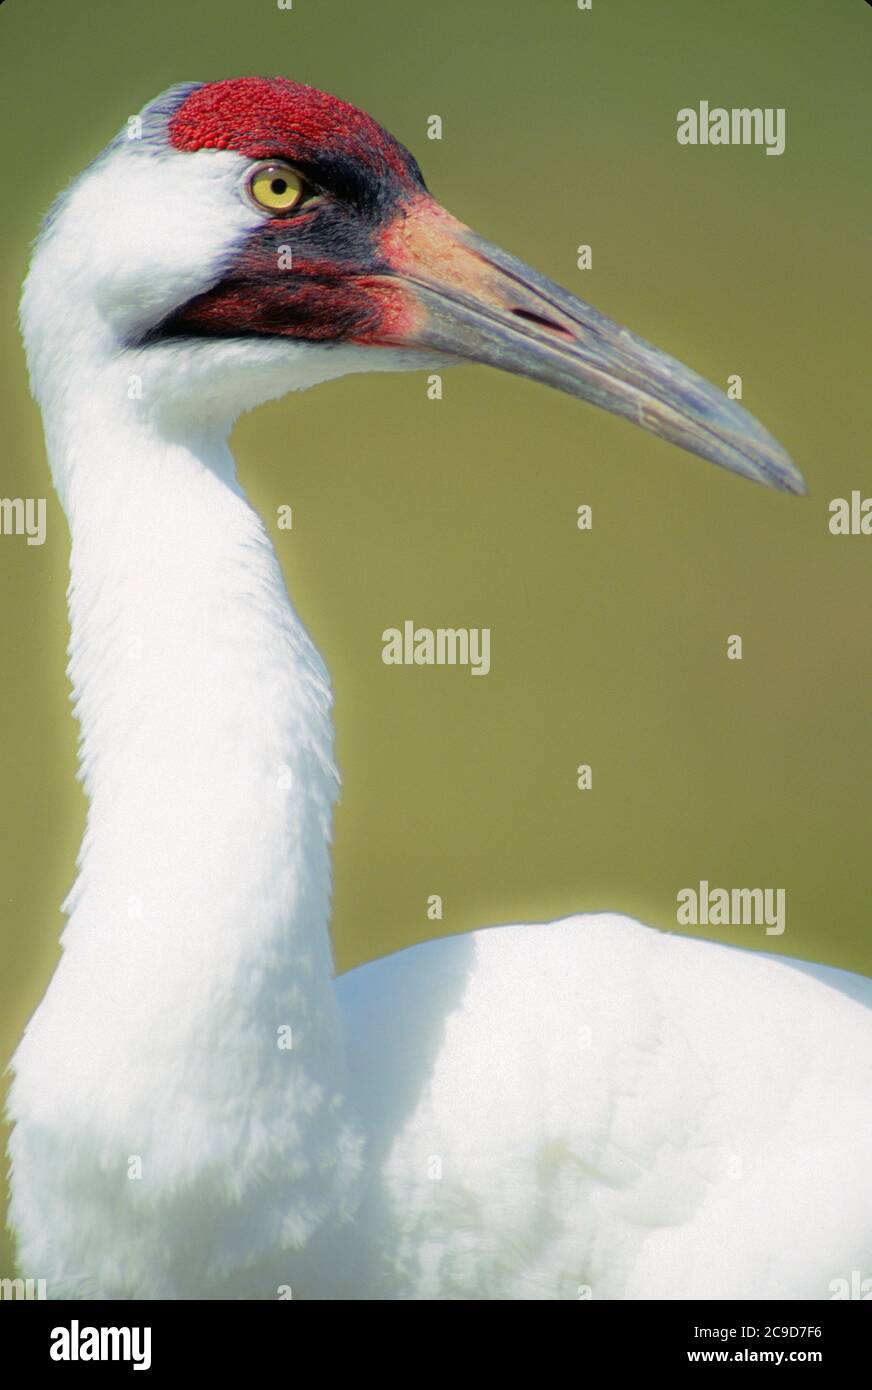 American whooping crane close-up Stock Photo